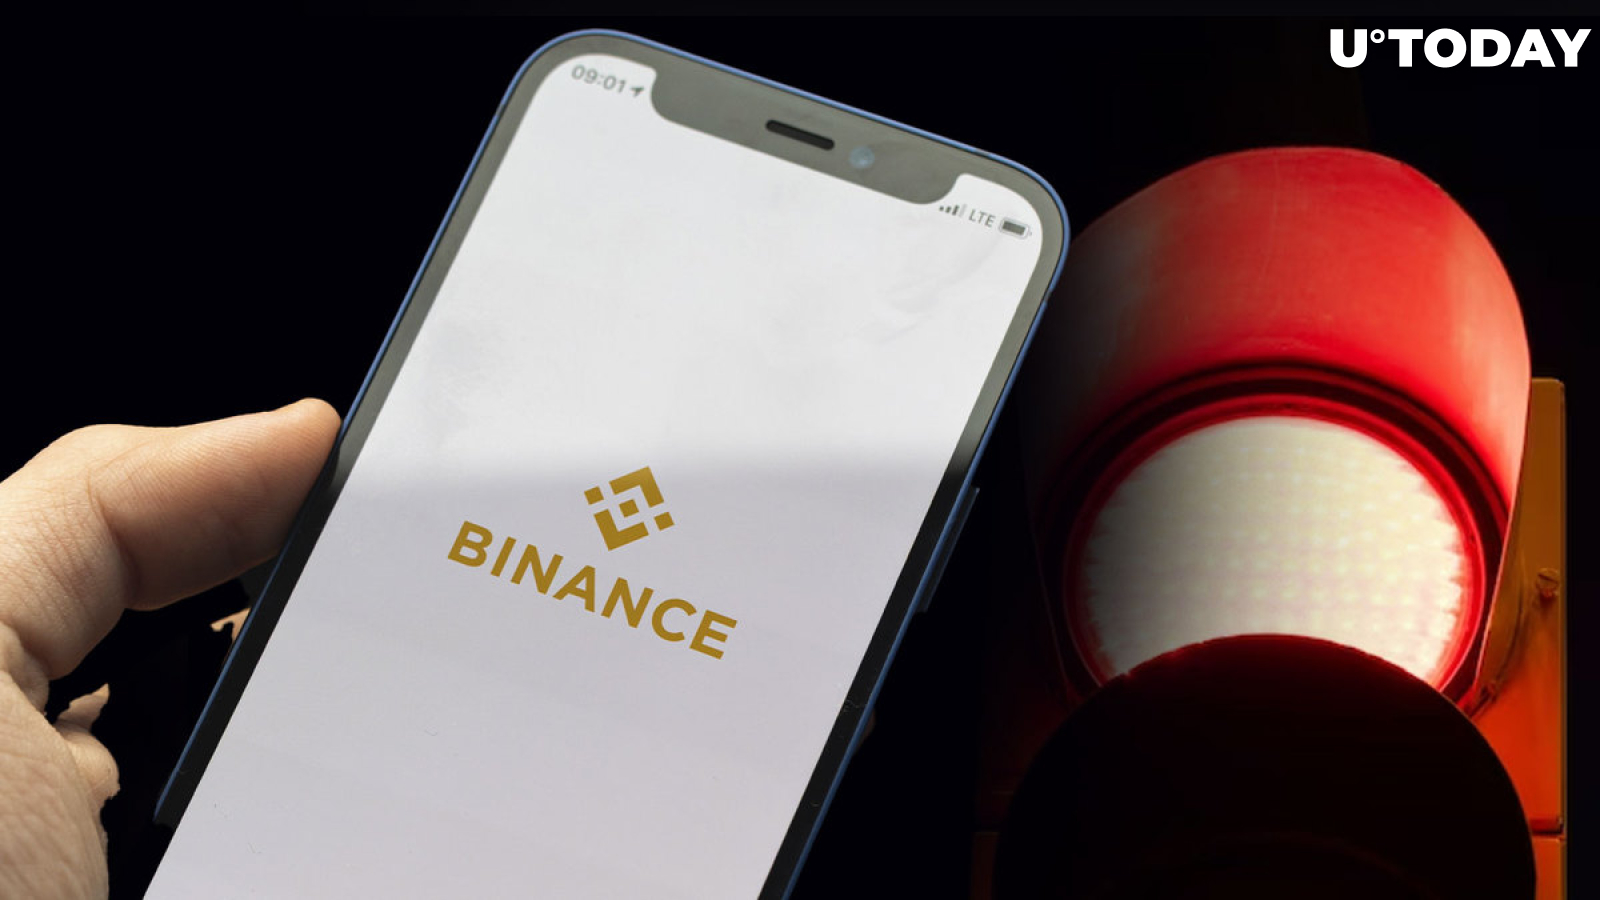 Binance Temporarily Pauses Trading, What's Happening?